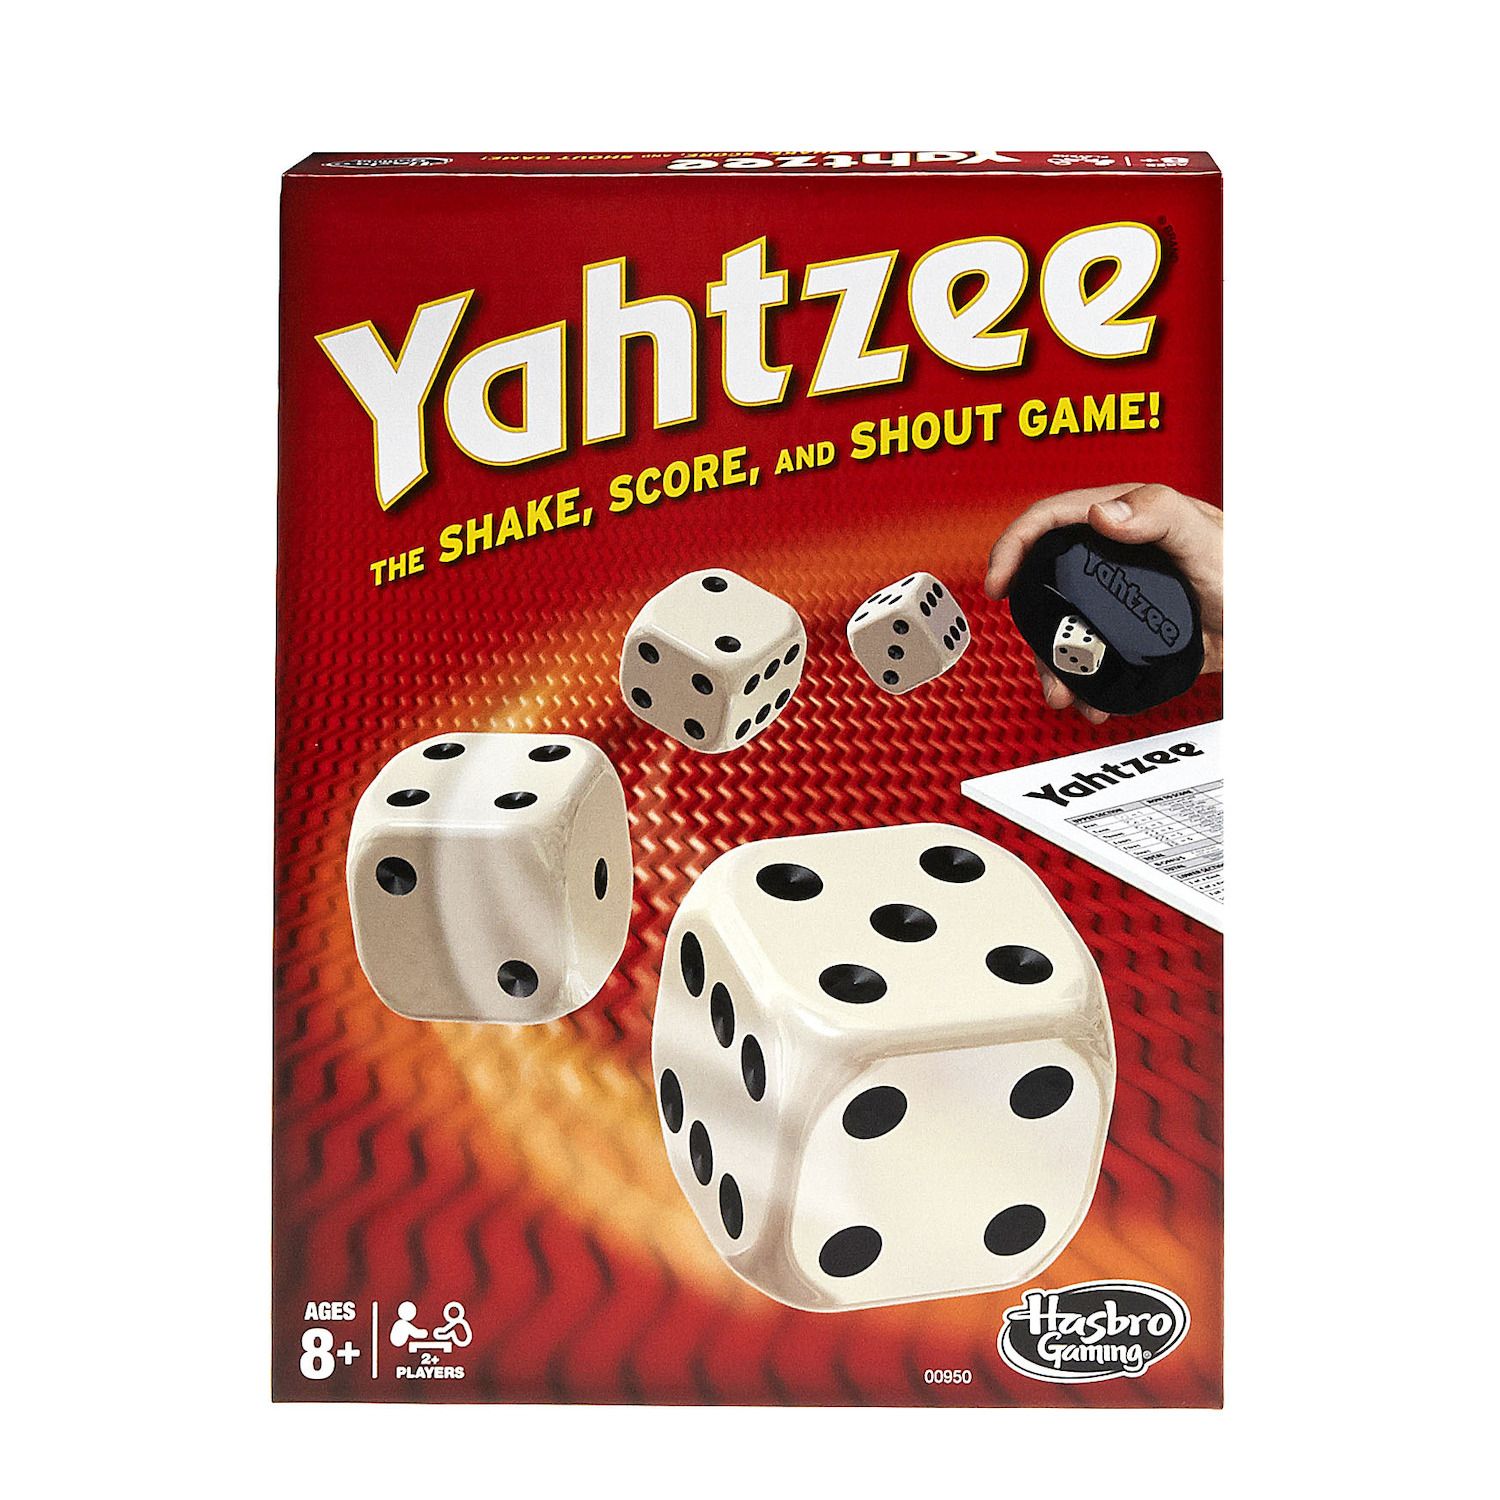 Image for Hasbro Yahtzee Classic Game by at Kohl's.